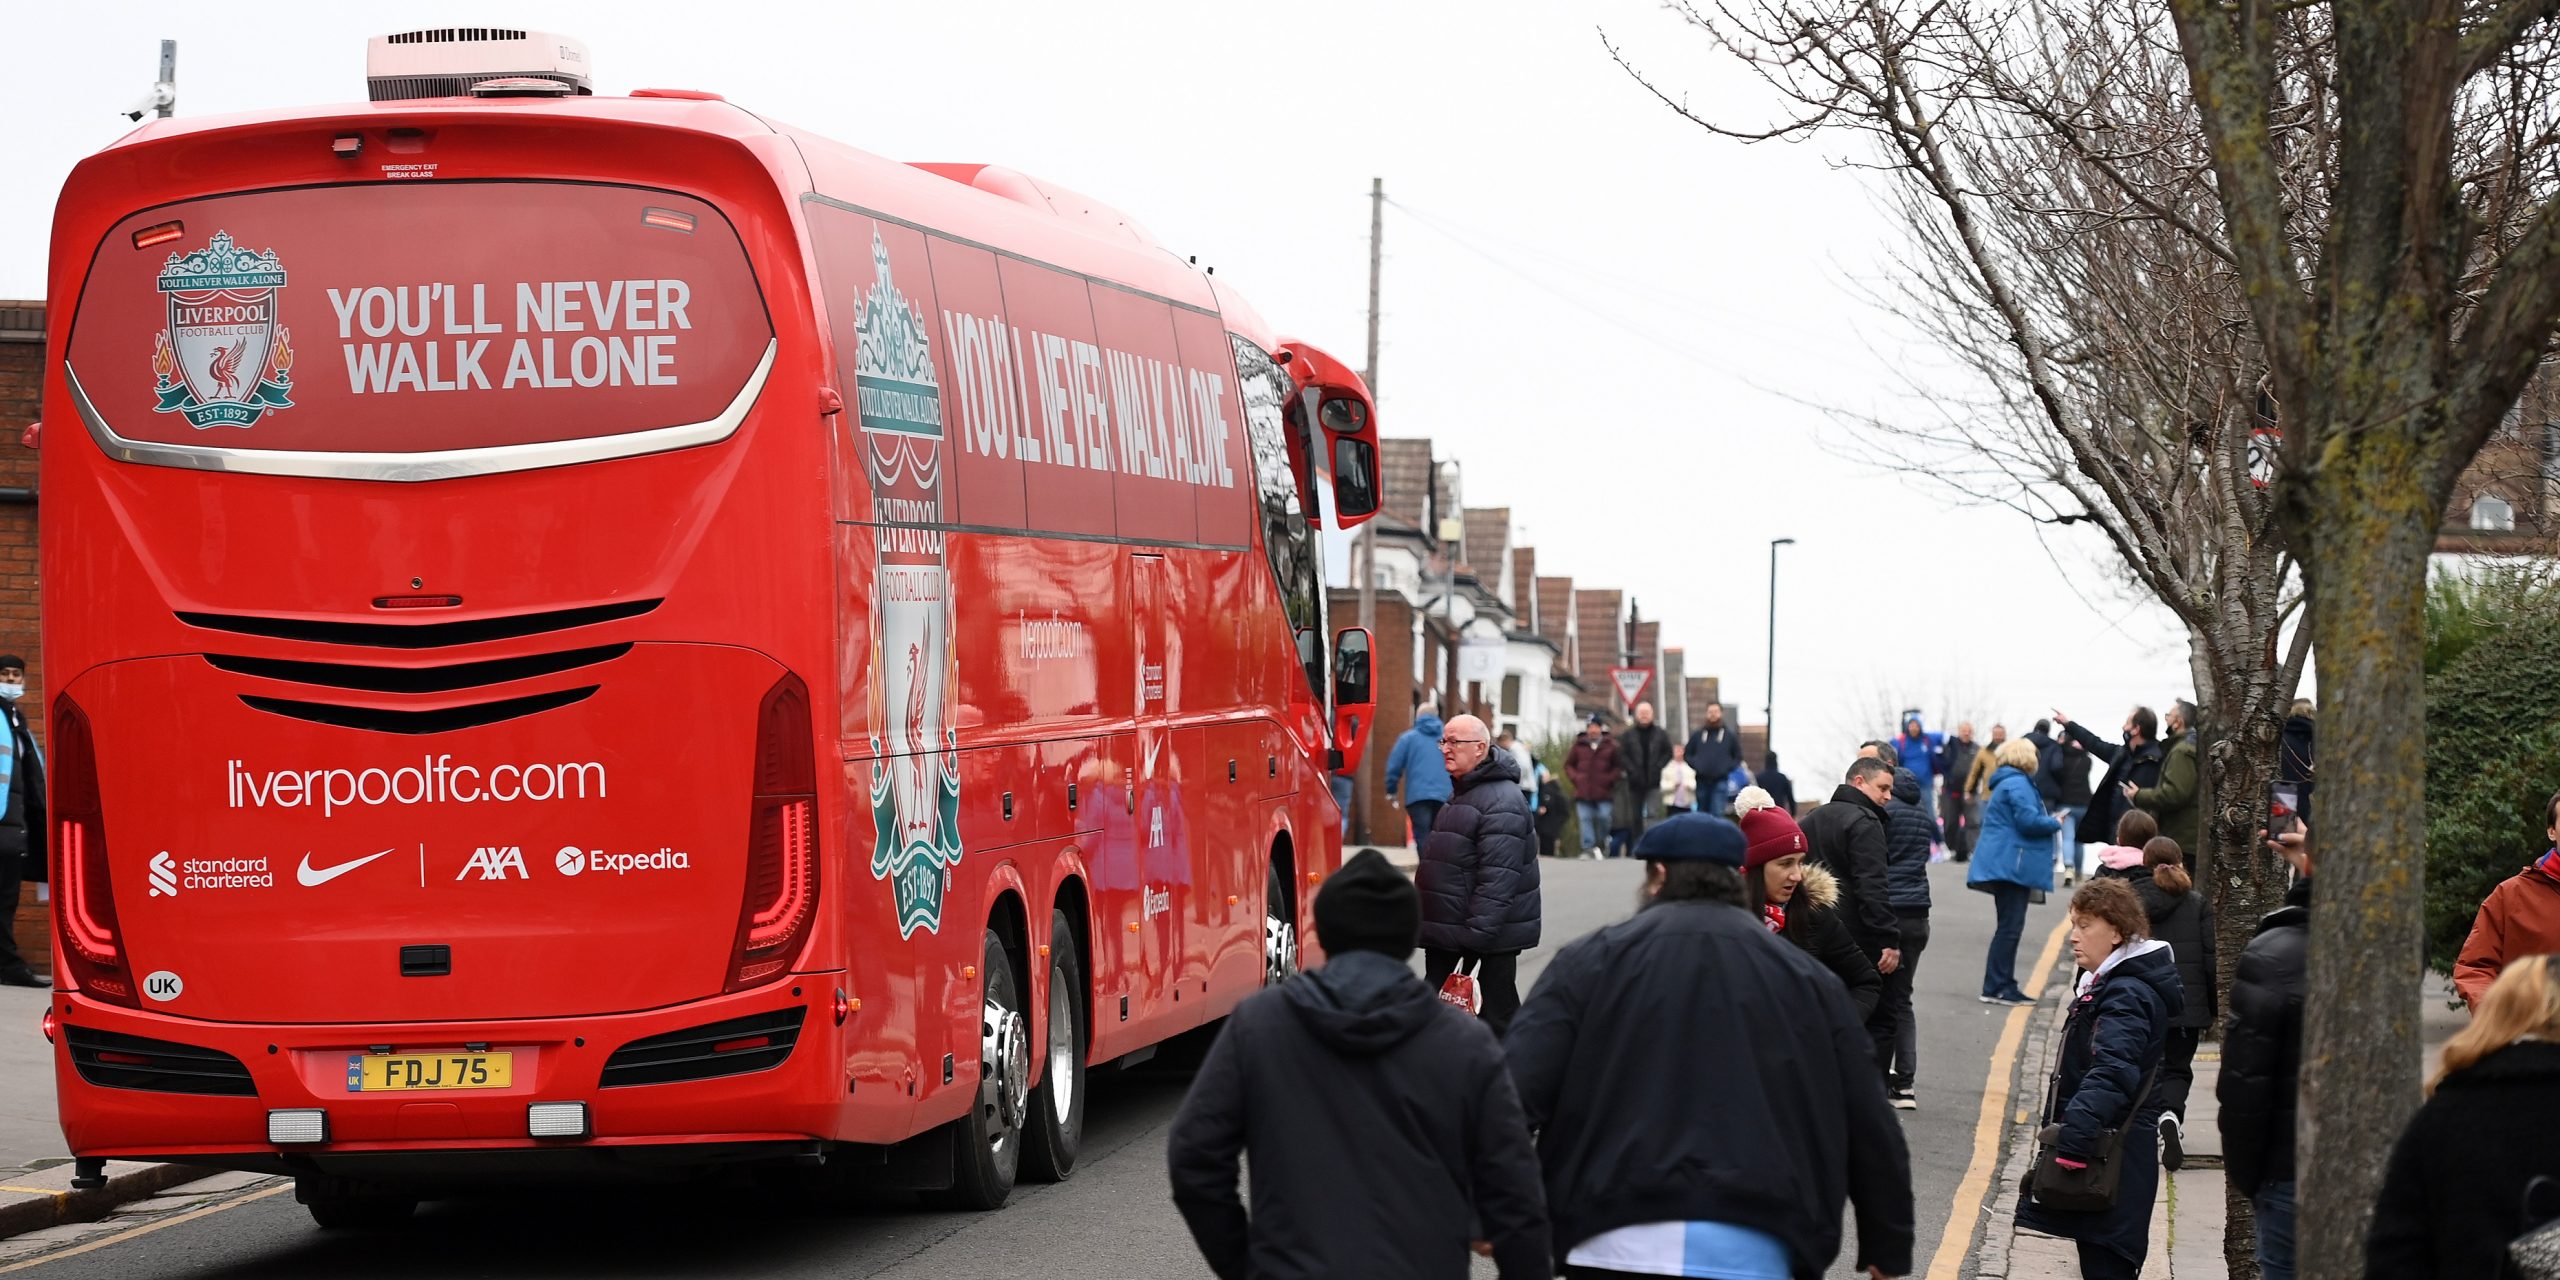 LONDON, ENGLAND - JANUARY 23: The Liverpool team bus arrives at the stadium prior to the Premier League match between Crystal Palace  and  Liverpool at Selhurst Park on January 23, 2022 in London, England. (Photo by Mike Hewitt/Getty Images)